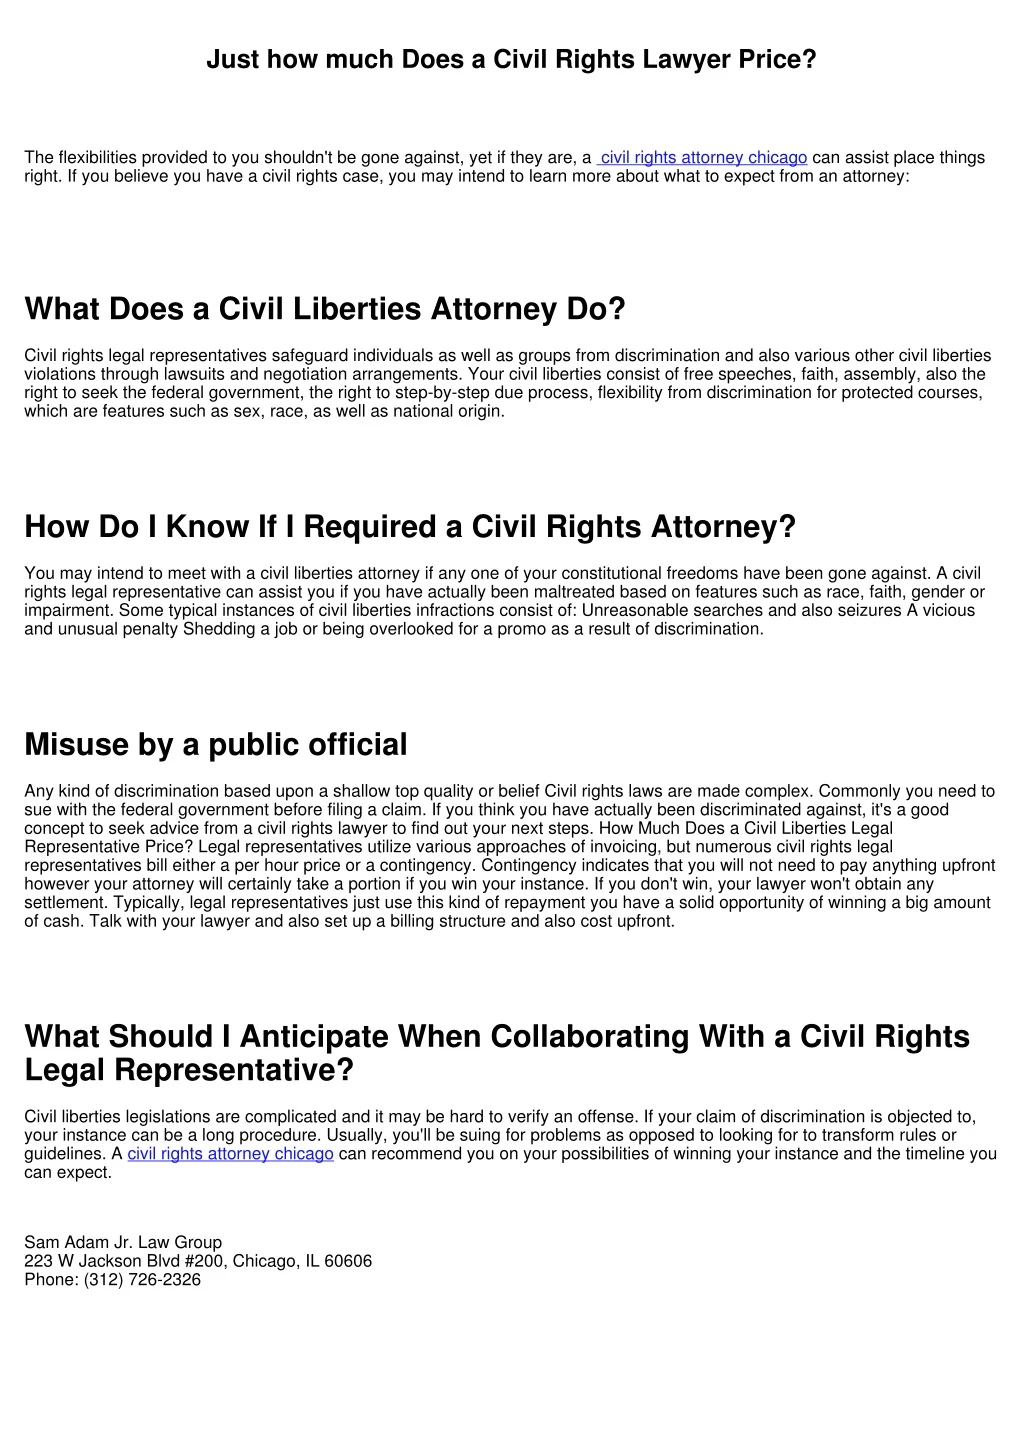 just how much does a civil rights lawyer price